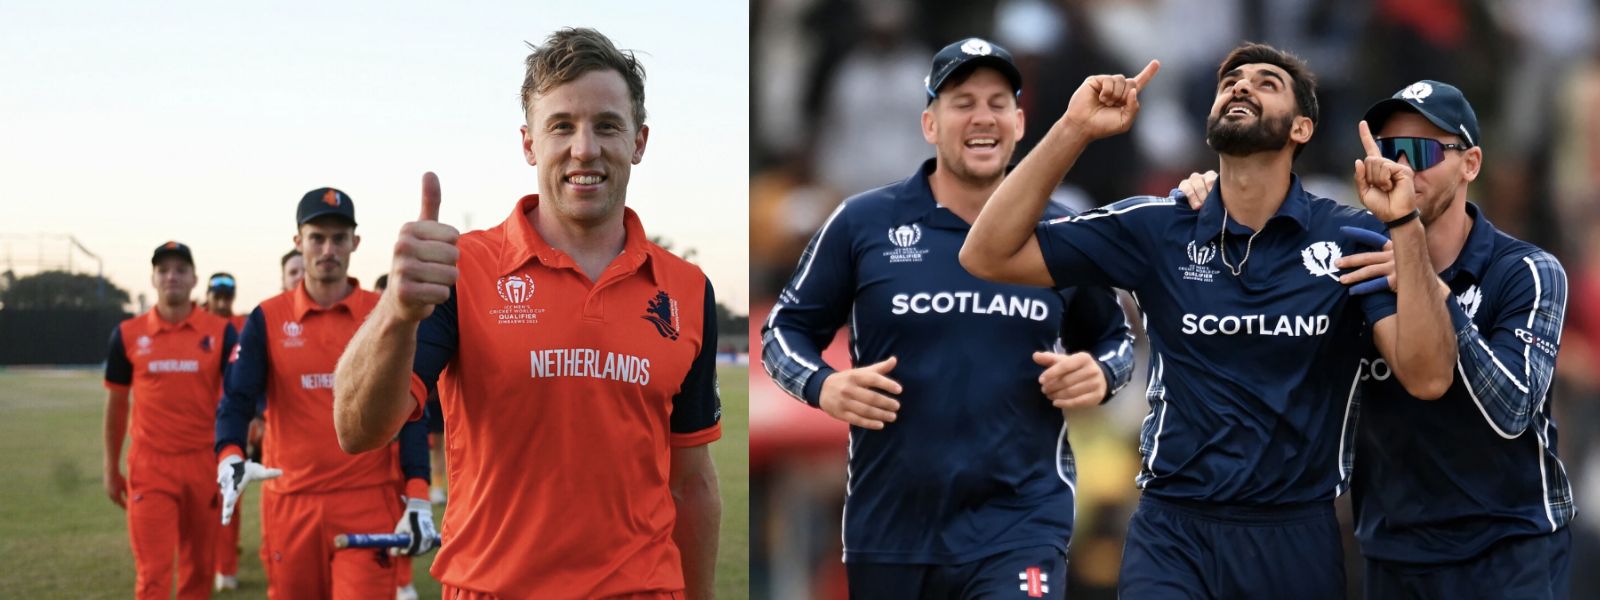 Scotland and Netherlands battle for World Cup spot